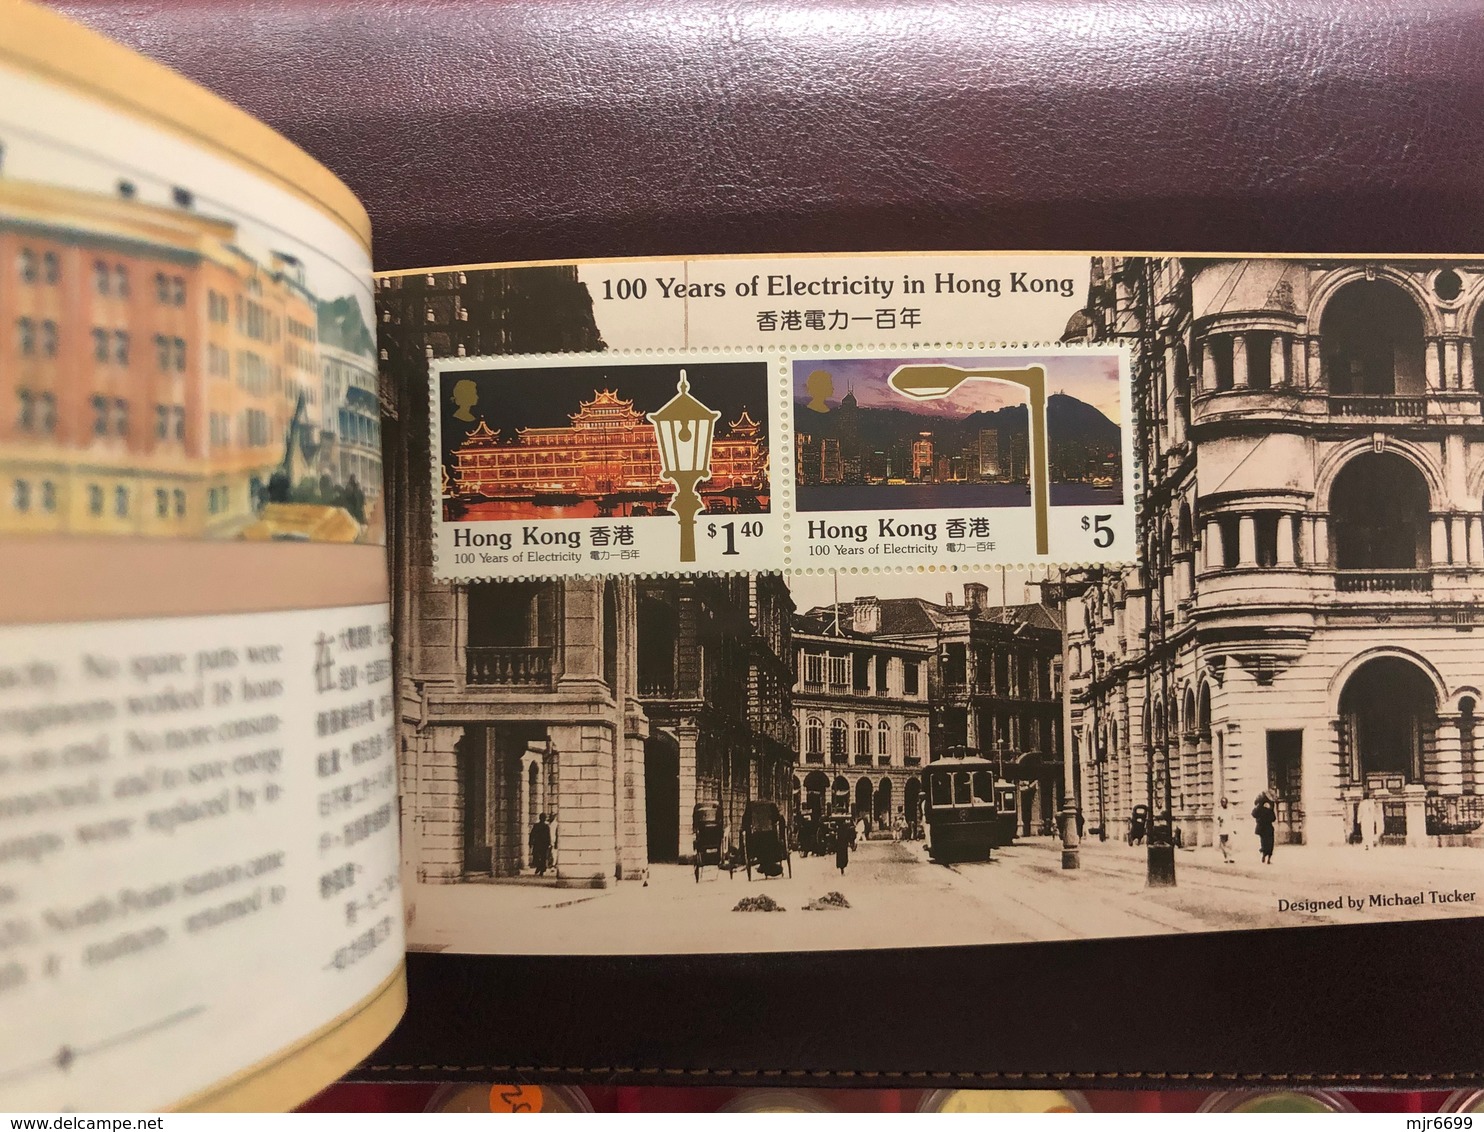 1990 HONG KONG ELECTRIC 100 YEARS COMMEMORATIVE BOOKLET - Booklets